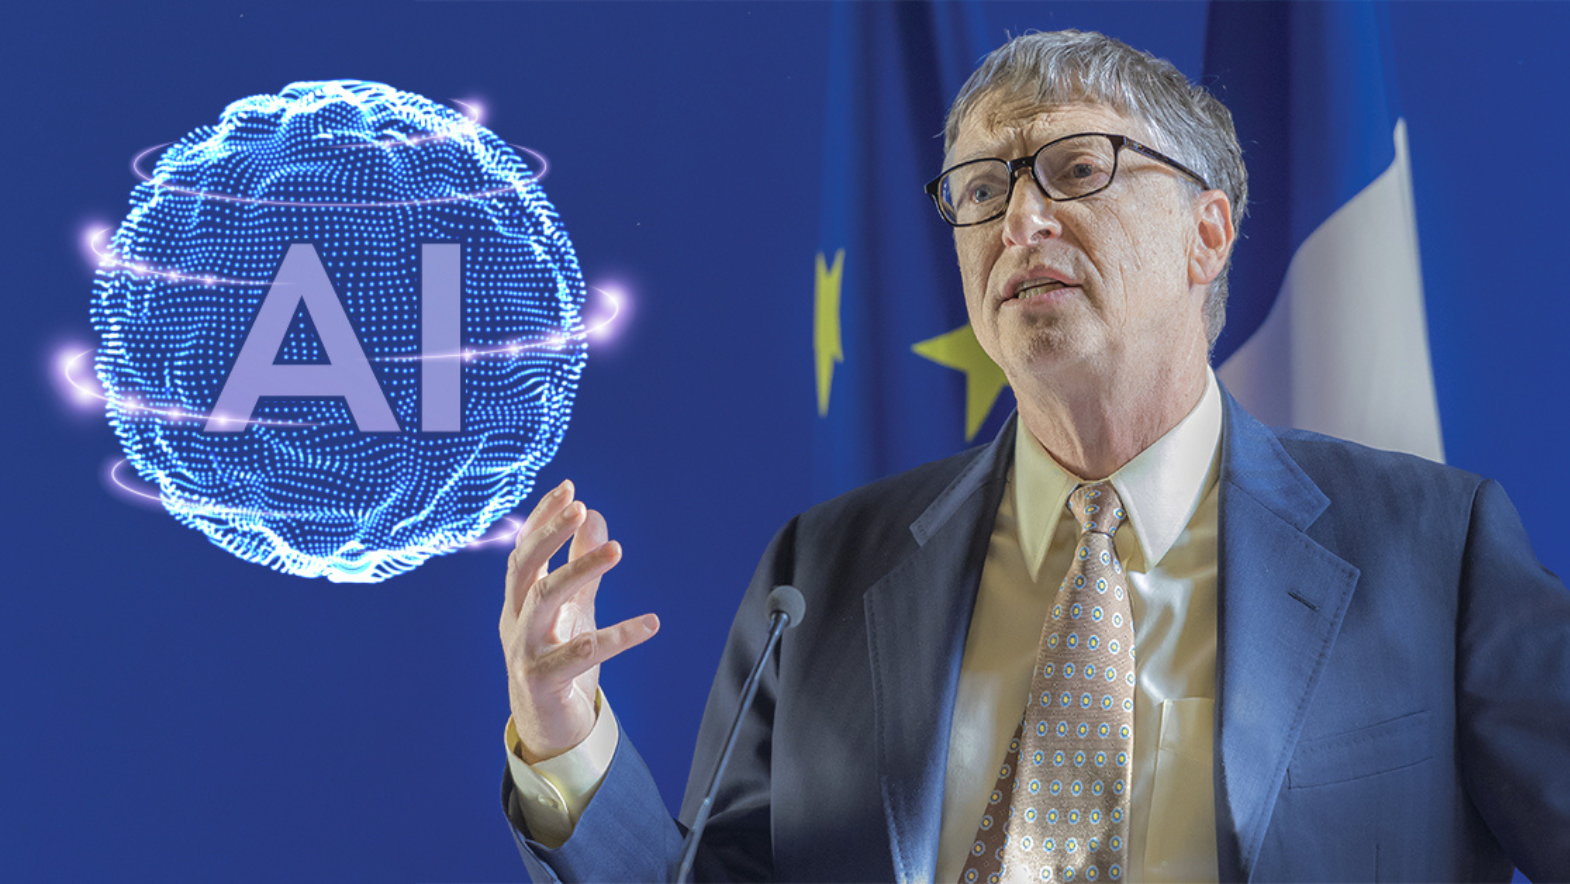 Bill Gates Predicts a Shorter Work Week Thanks to AI: What This Means for Our Jobs and Free Time